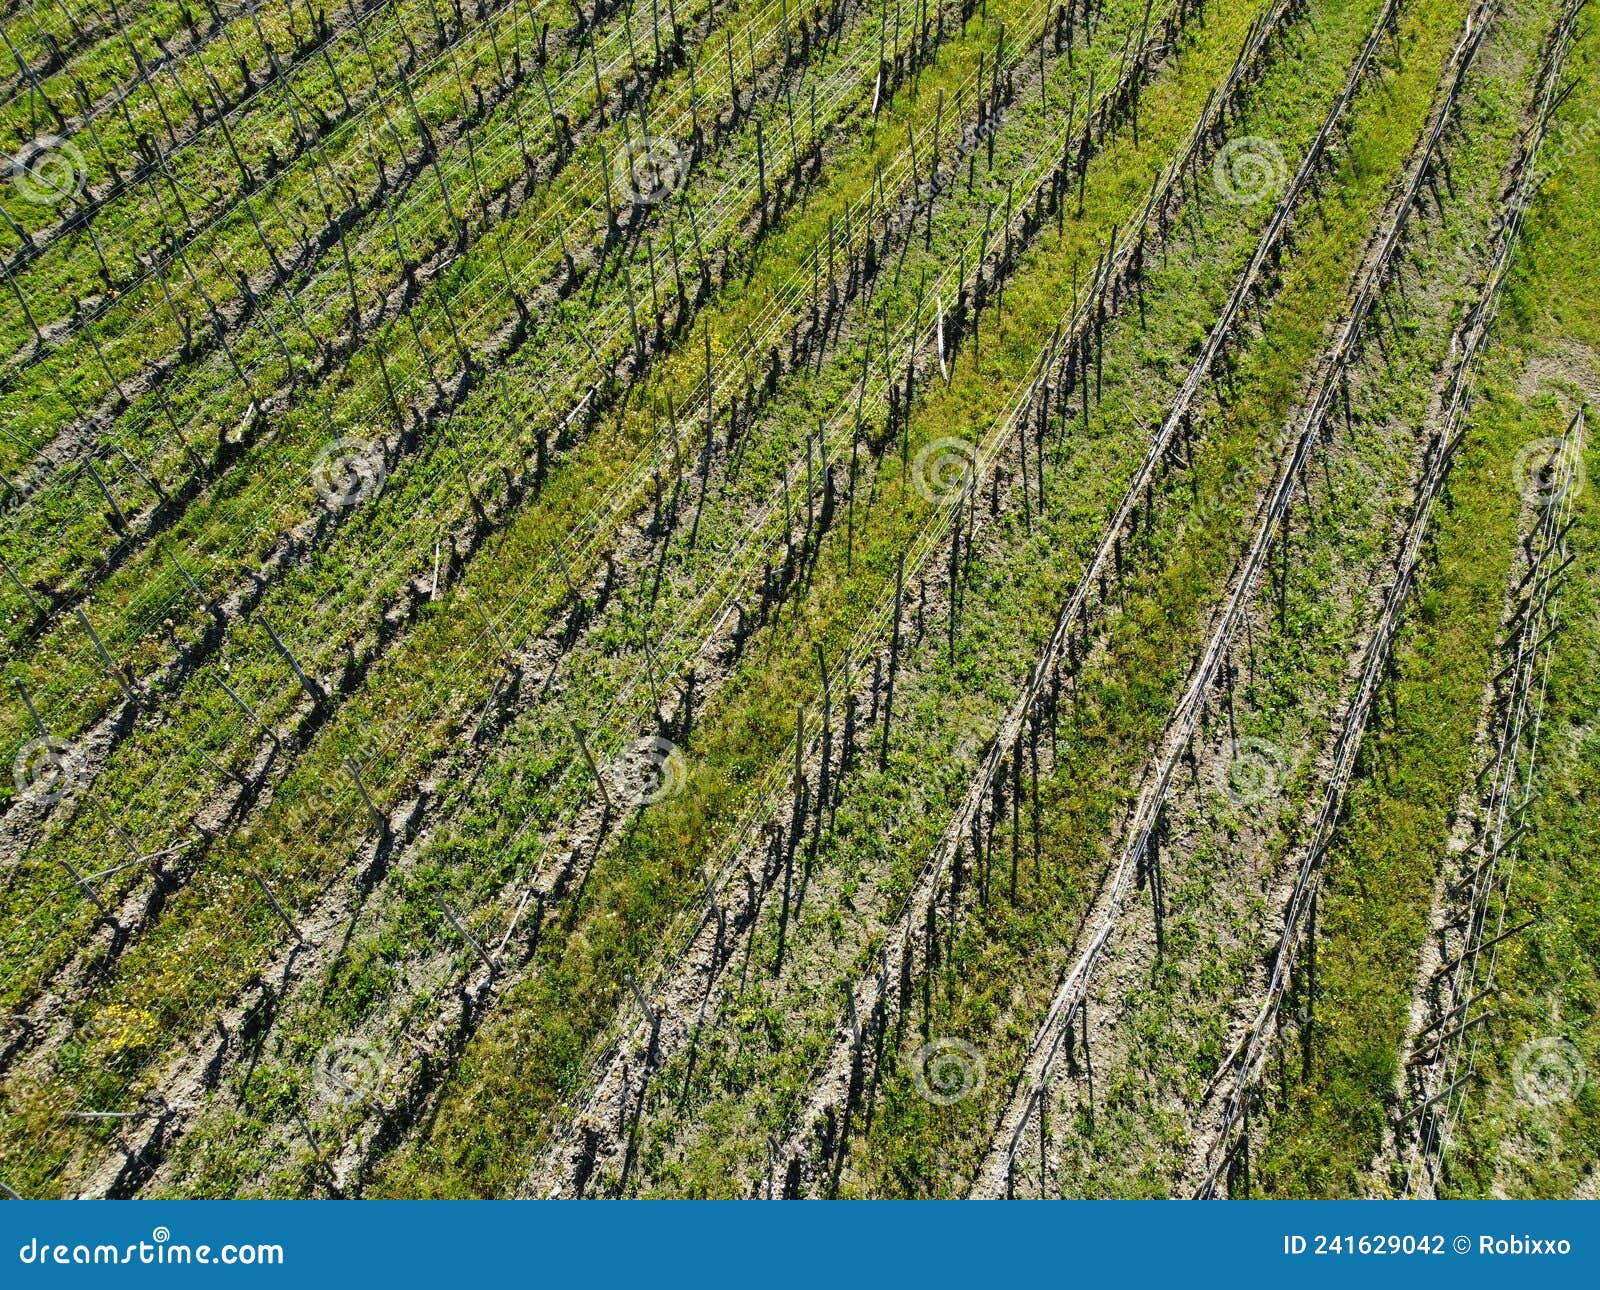 landscape of the vineyards of the piedmontese langhe, taken from above with a drone